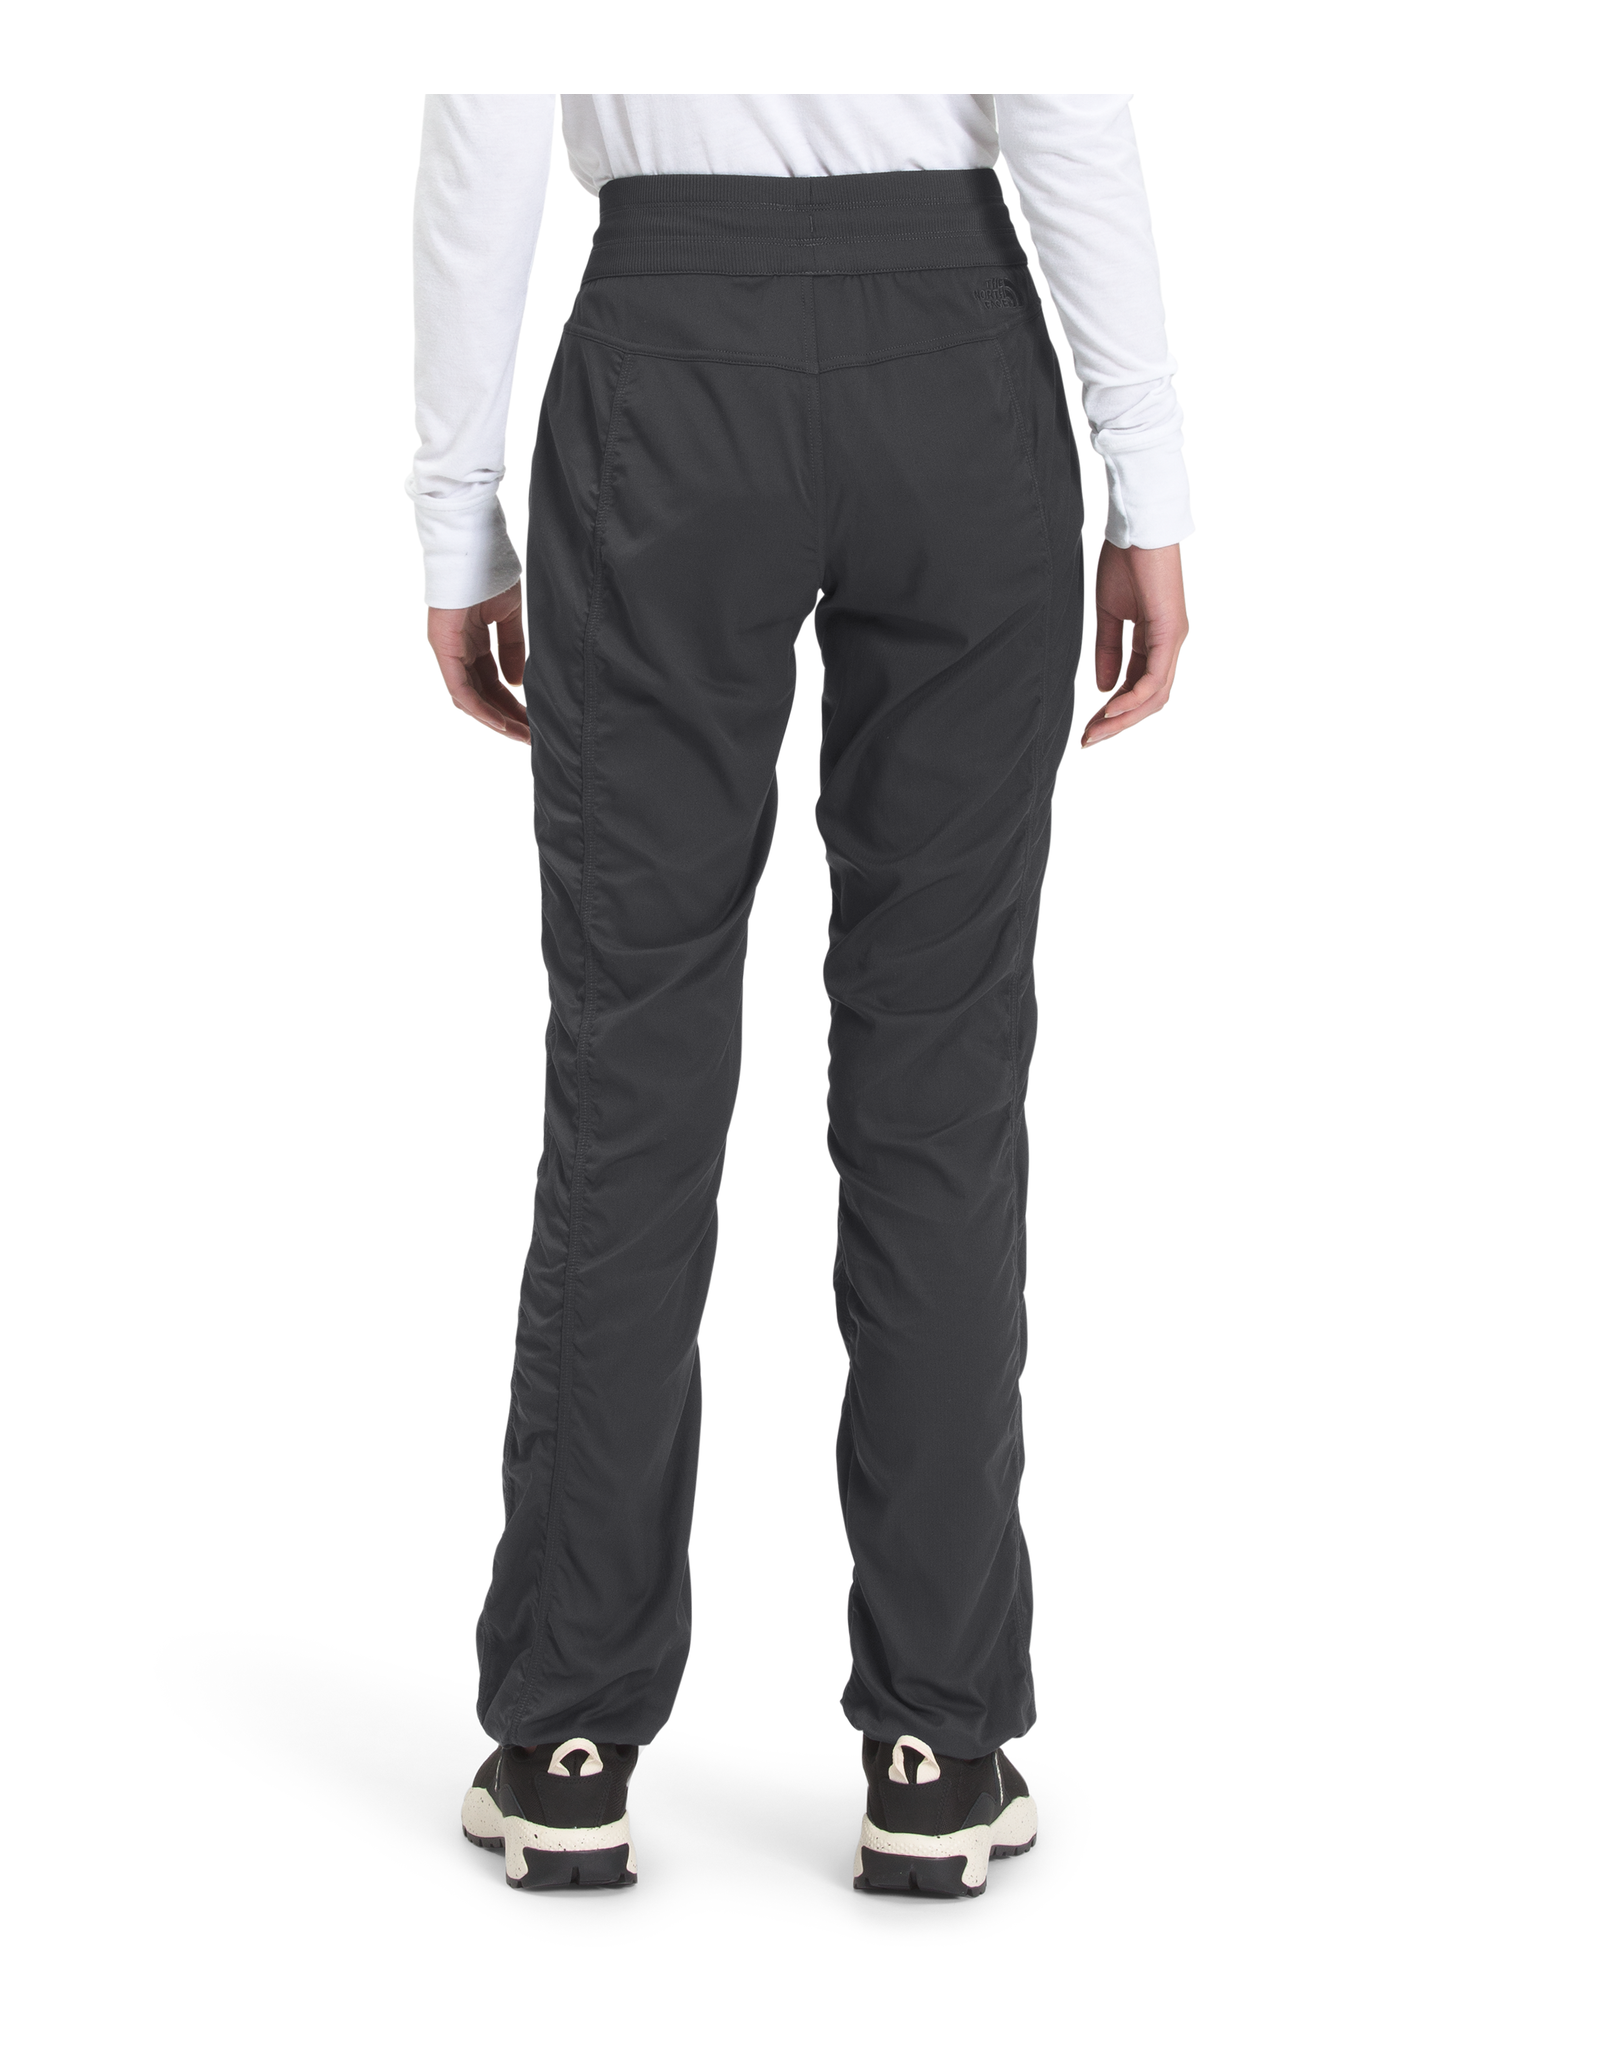 THE NORTH FACE WOMEN APHRODITE 2.0 PANT